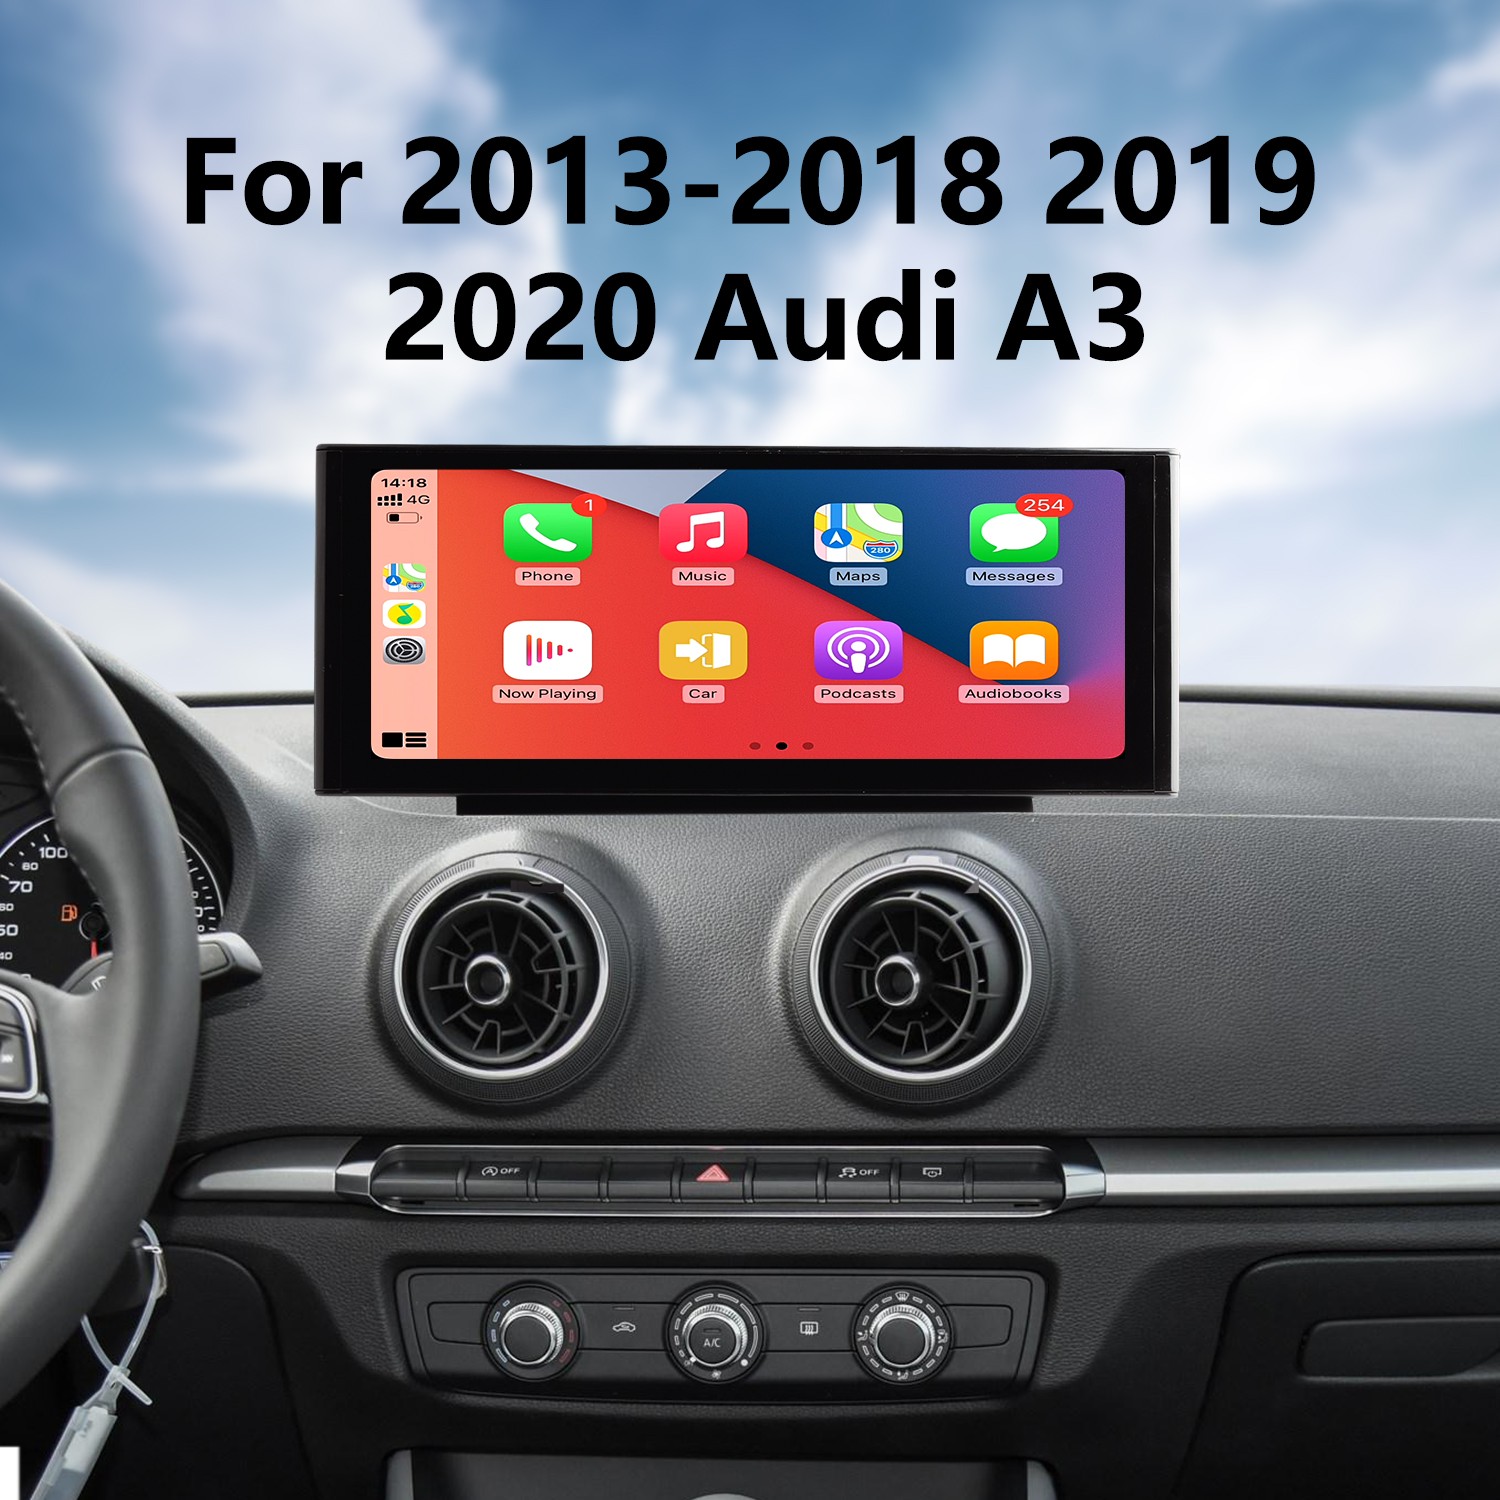 HD Touchscreen 12.3 inch Android 11.0 GPS Navigation Radio for 2013-2018  2019 2020 Audi A3 with Bluetooth AUX support DVR Carplay Steering Wheel